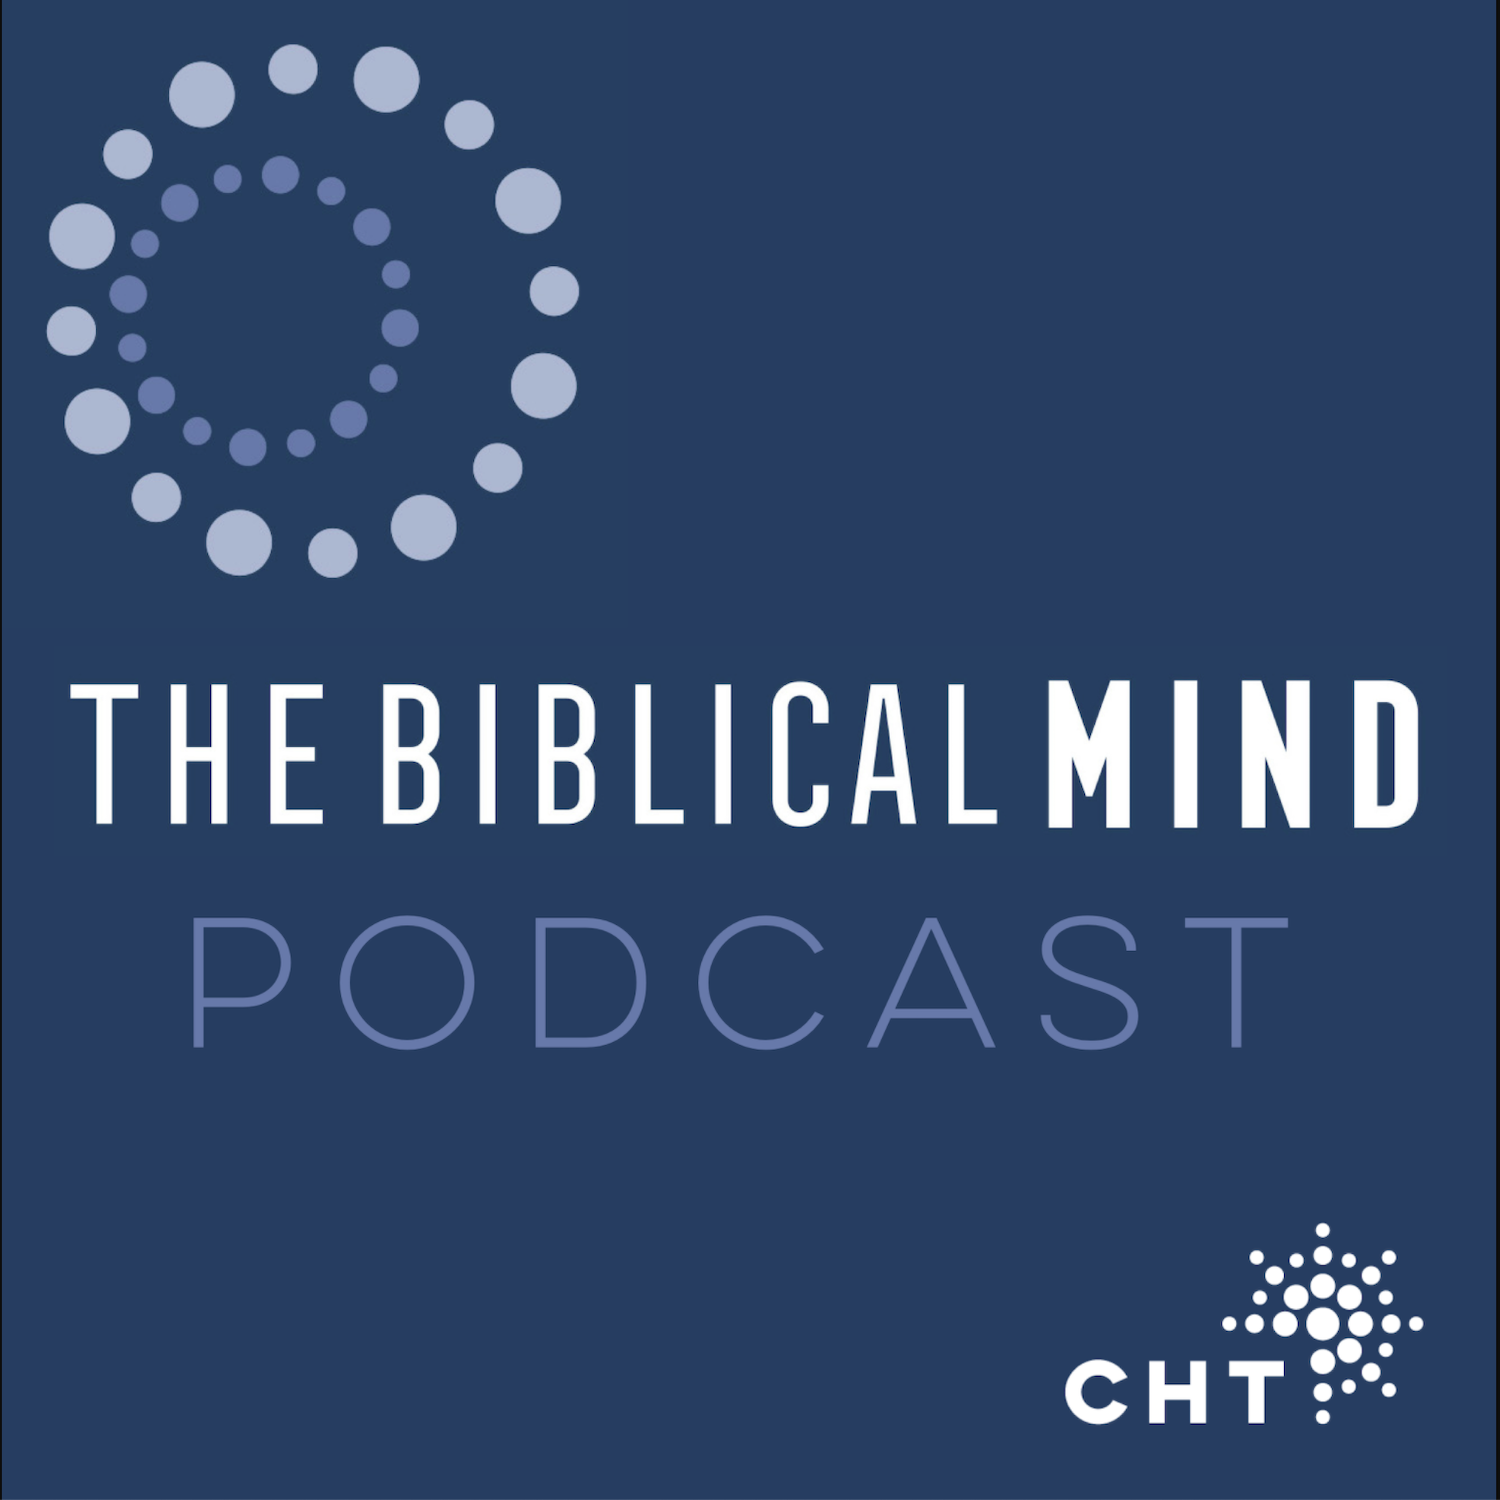 The Biblical Mind Podcast